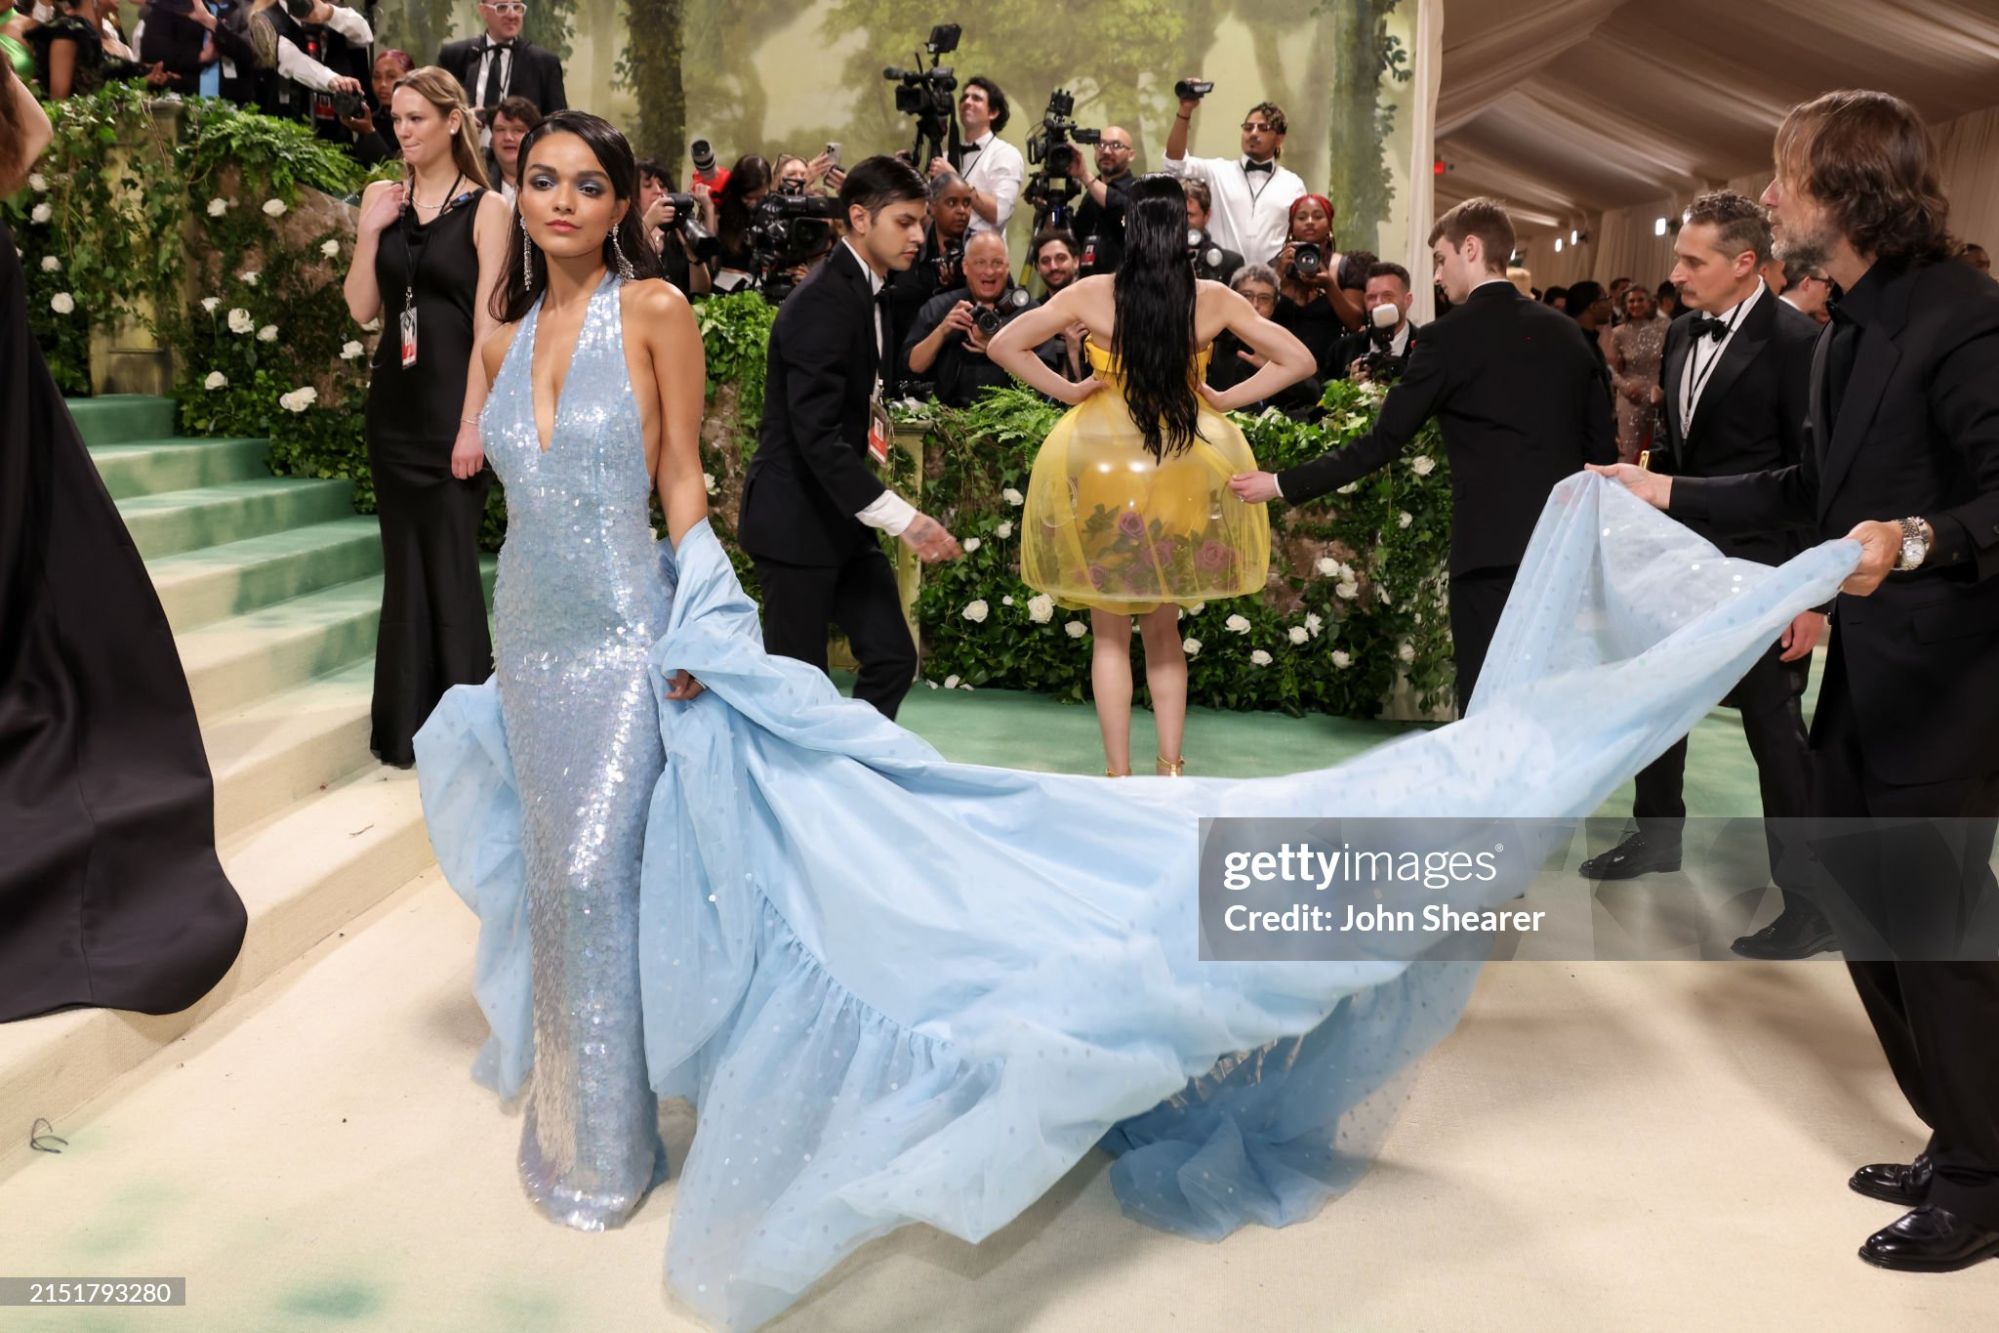 gettyimages-2151793280-2048x2048.jpg